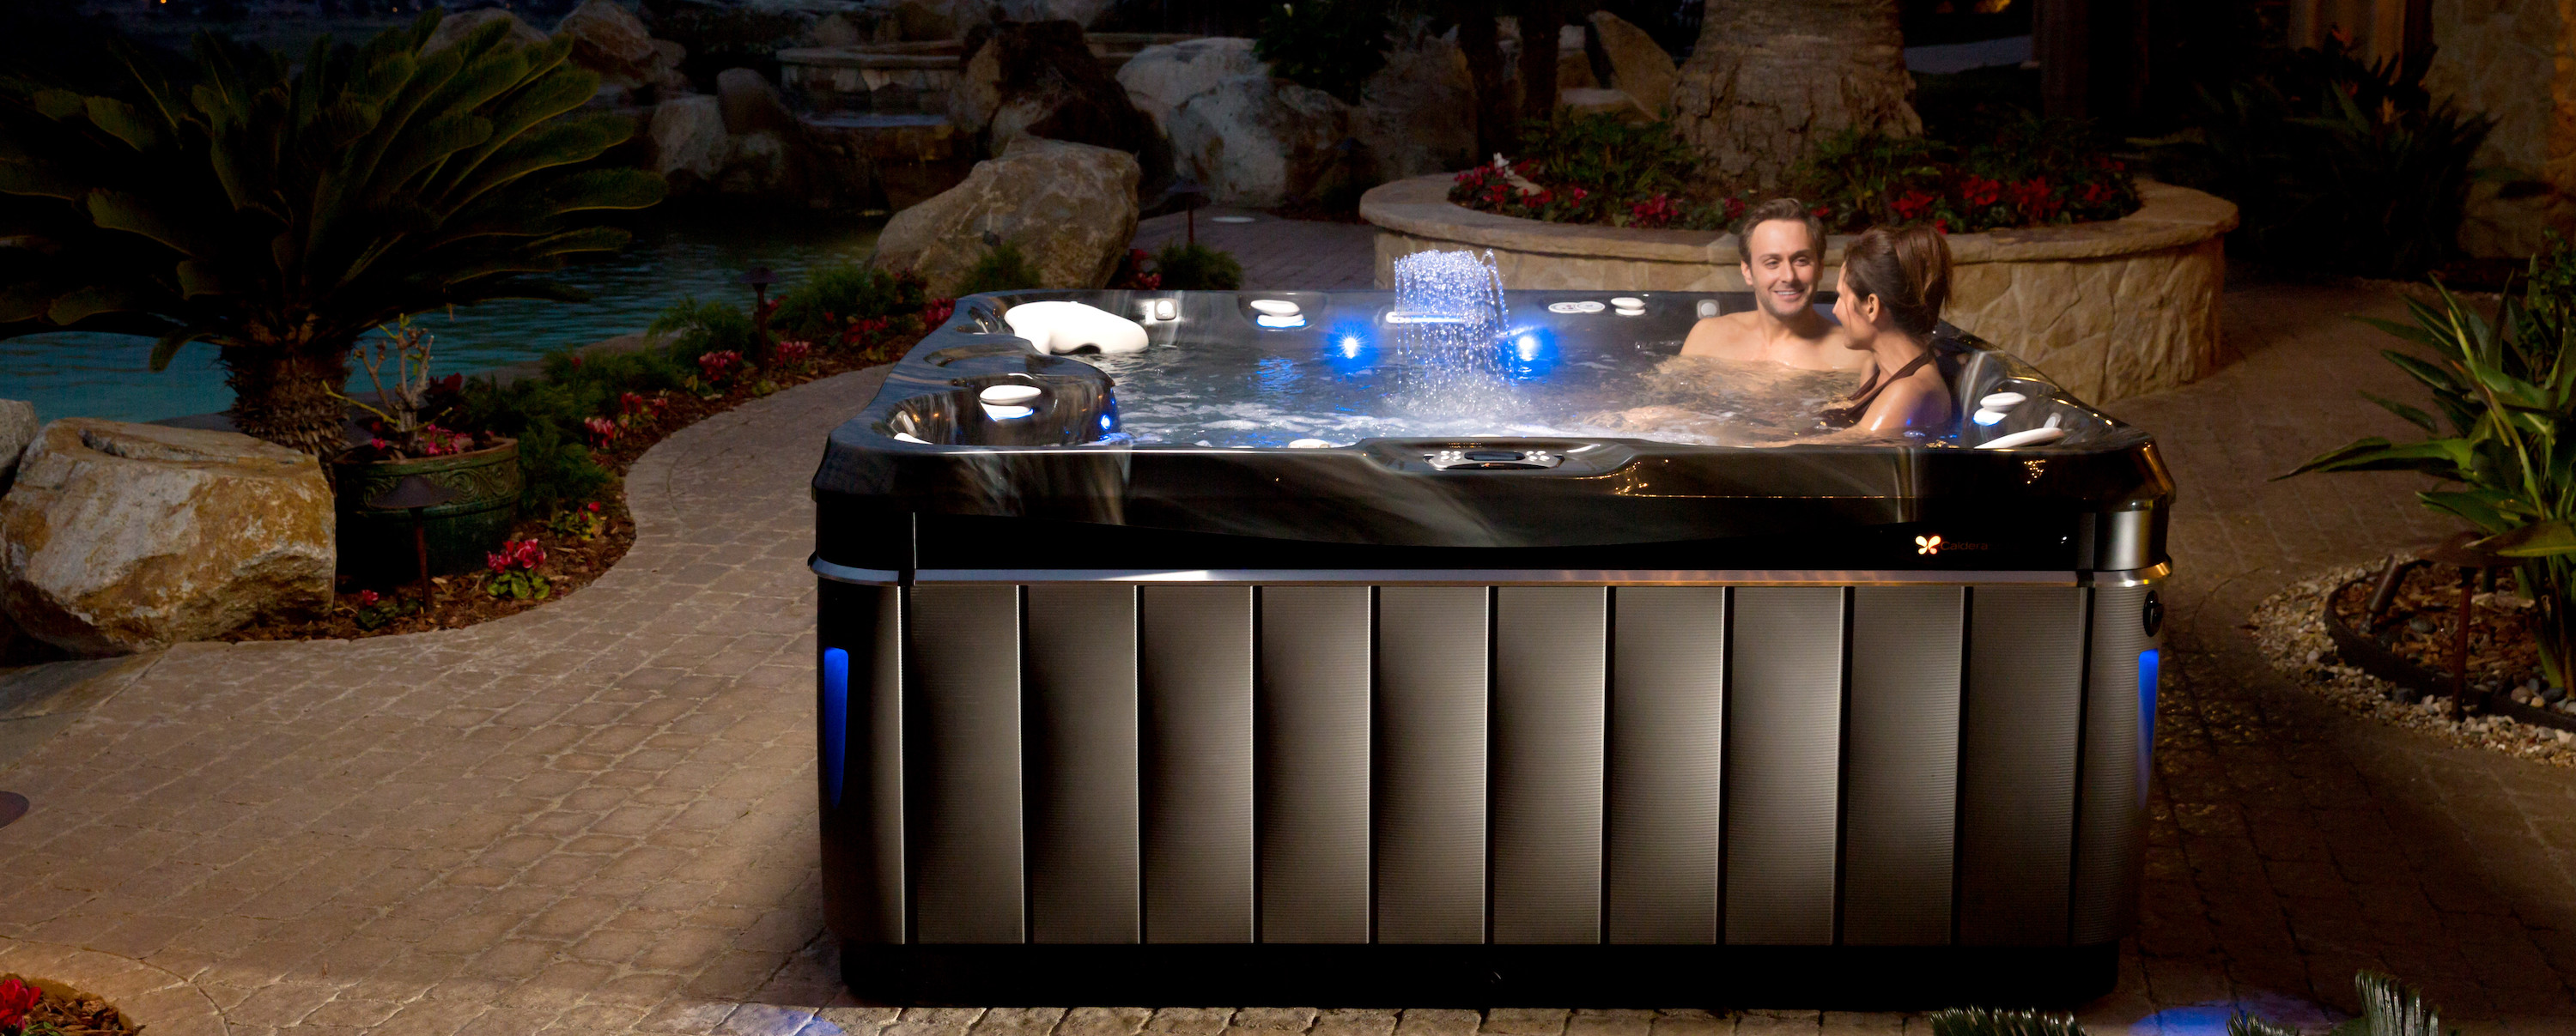 Jacuzzi Vs Hot Tub Vs Spa Whats The Difference Caldera Spas